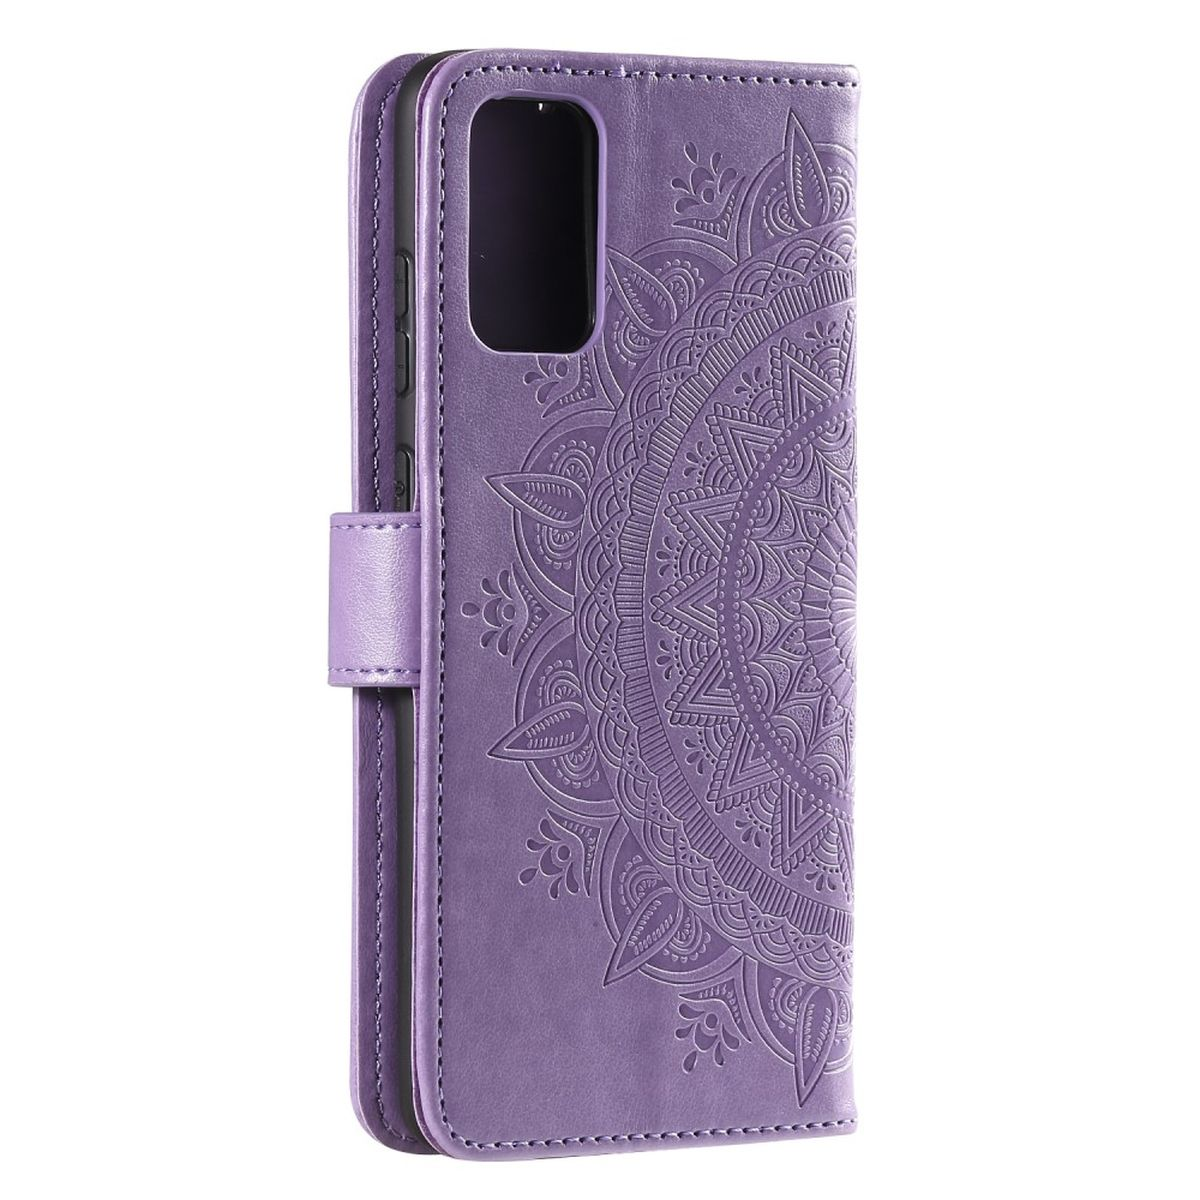 COVERKINGZ Klapphülle mit Mandala Lila 5G, Bookcover, A53 Muster, Samsung, Galaxy